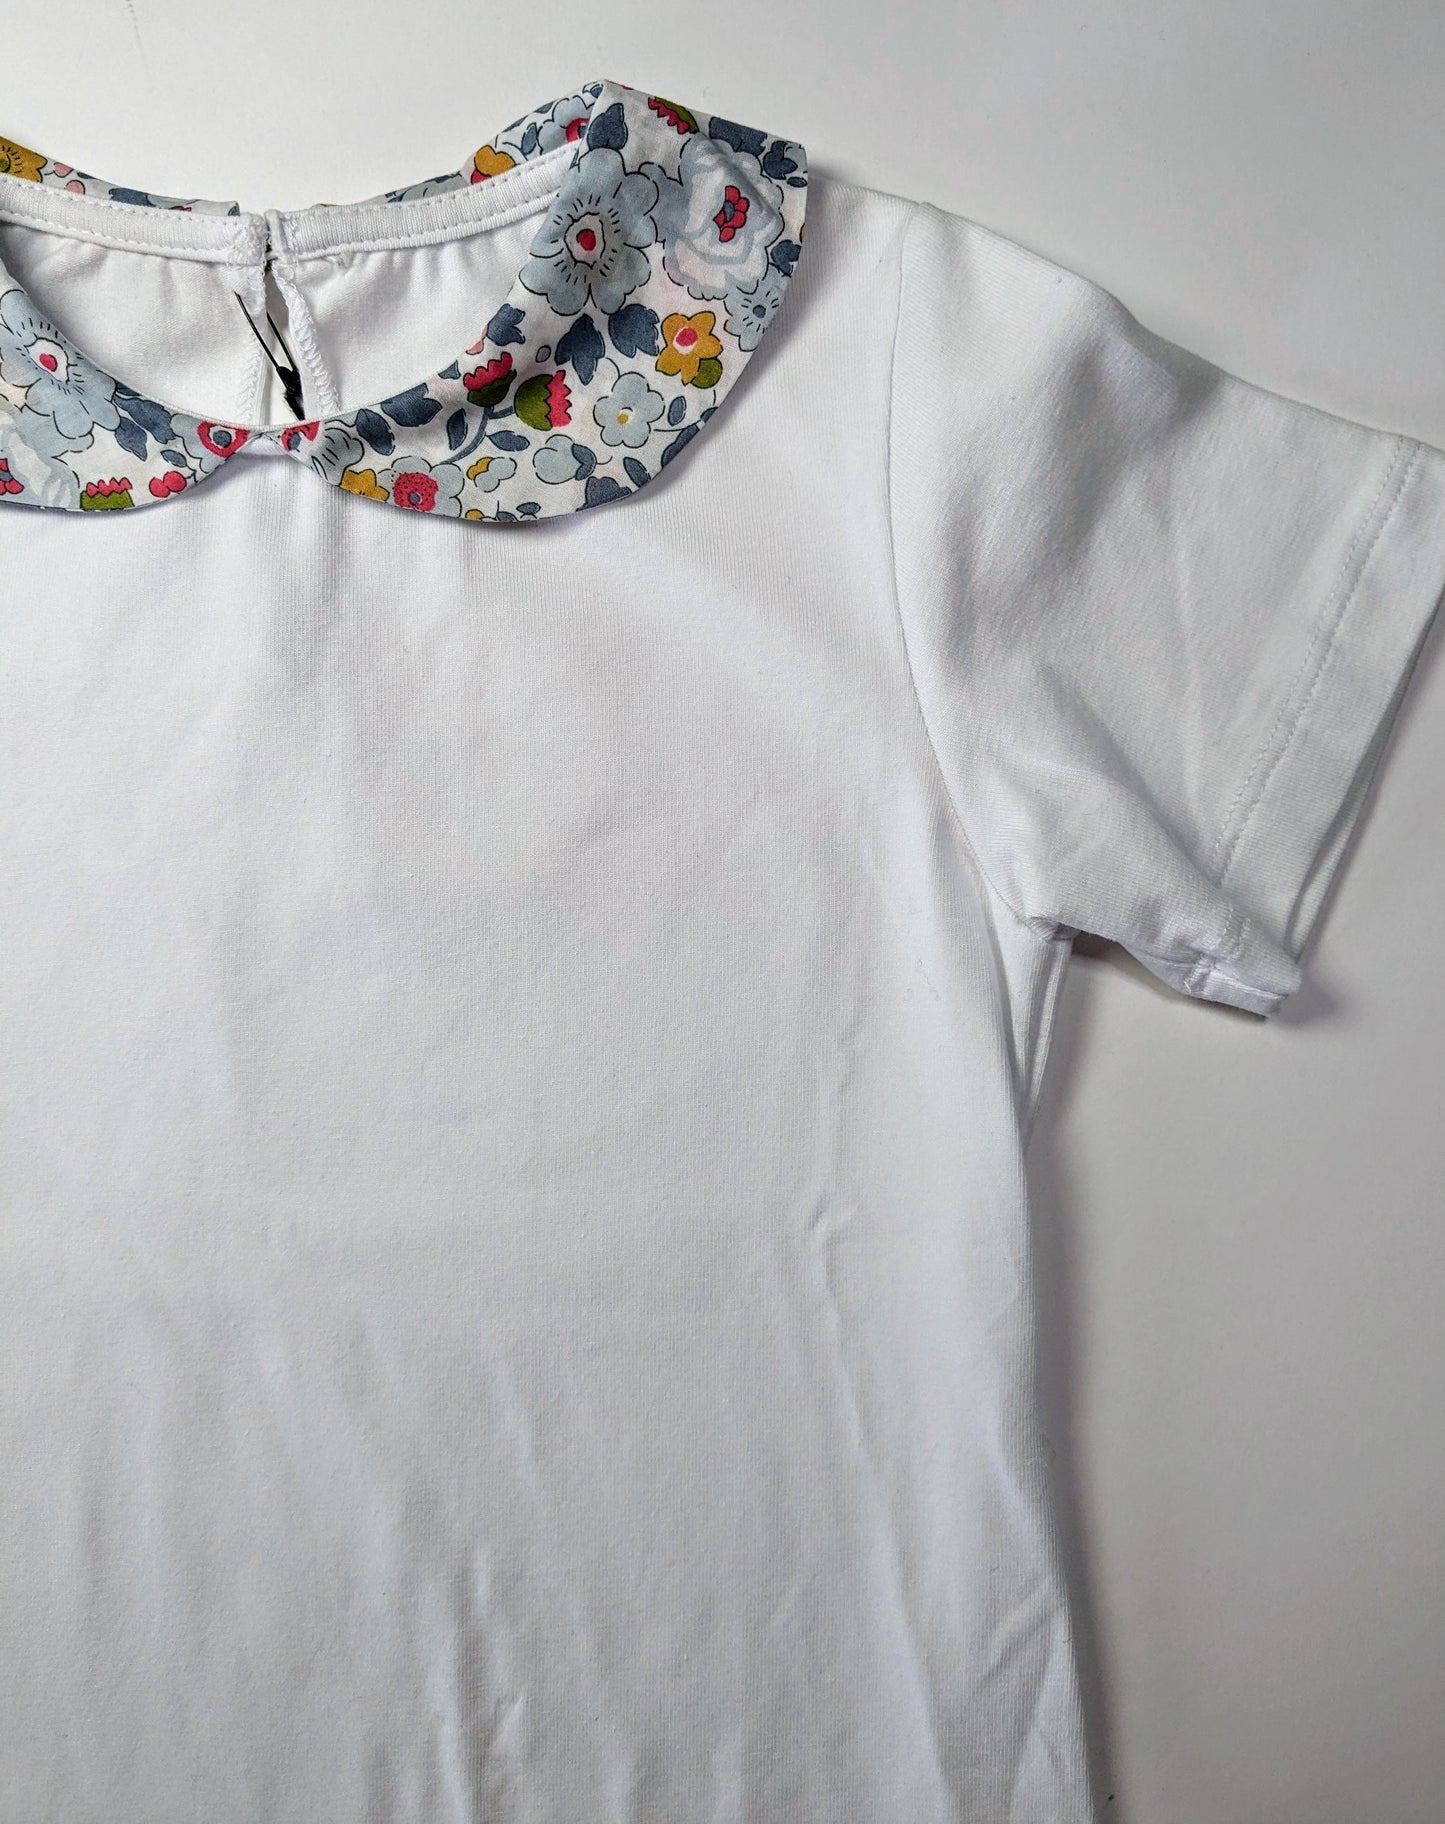 T - shirt colletto liberty